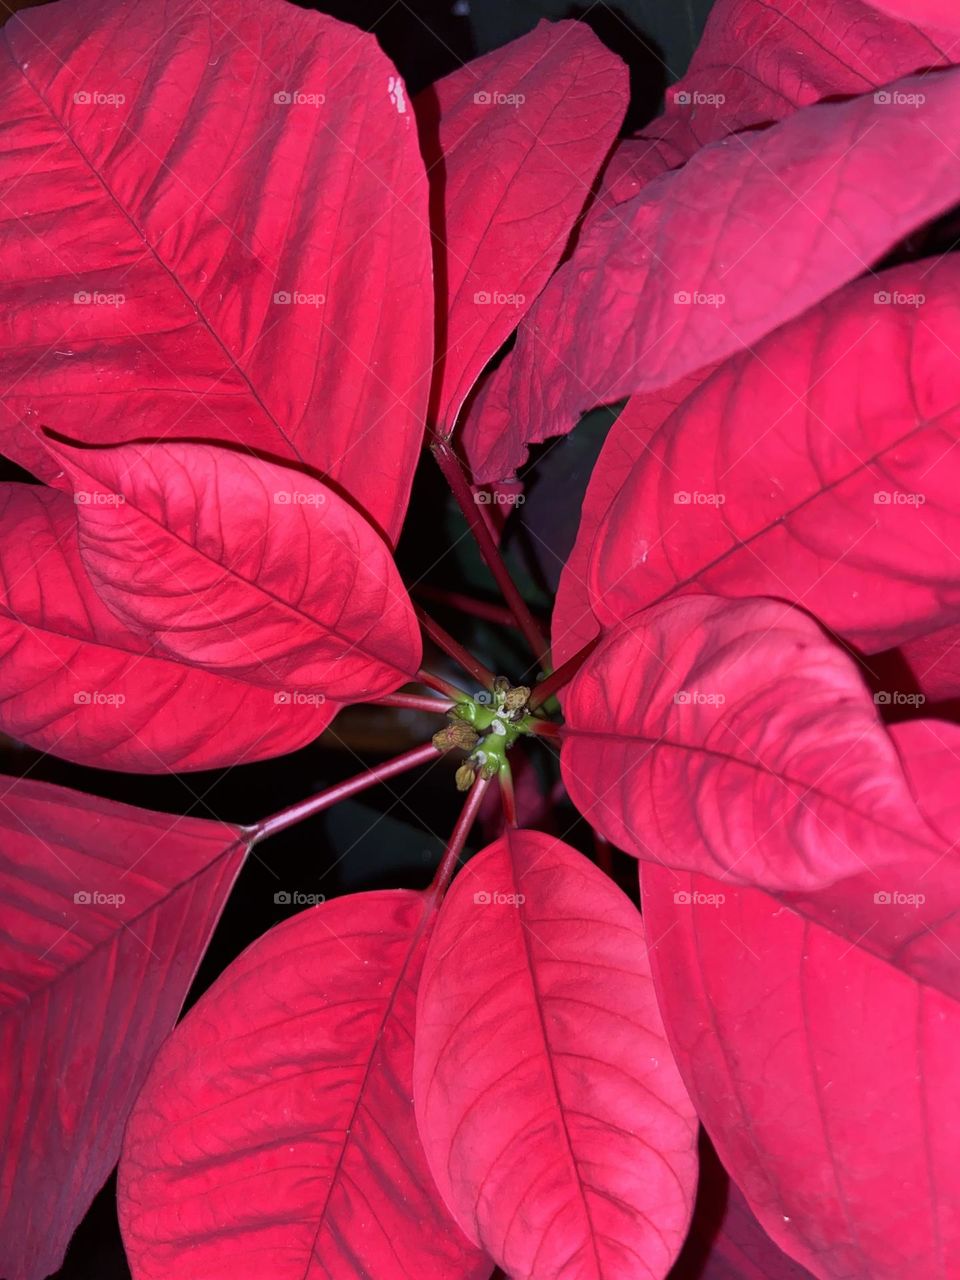 An overhead shot of my Mom’s Poinsettia plant taken in night mode, which really brings out the beautiful red color of the leaves that make this plant such a beautiful living symbol of the Christmas season. 